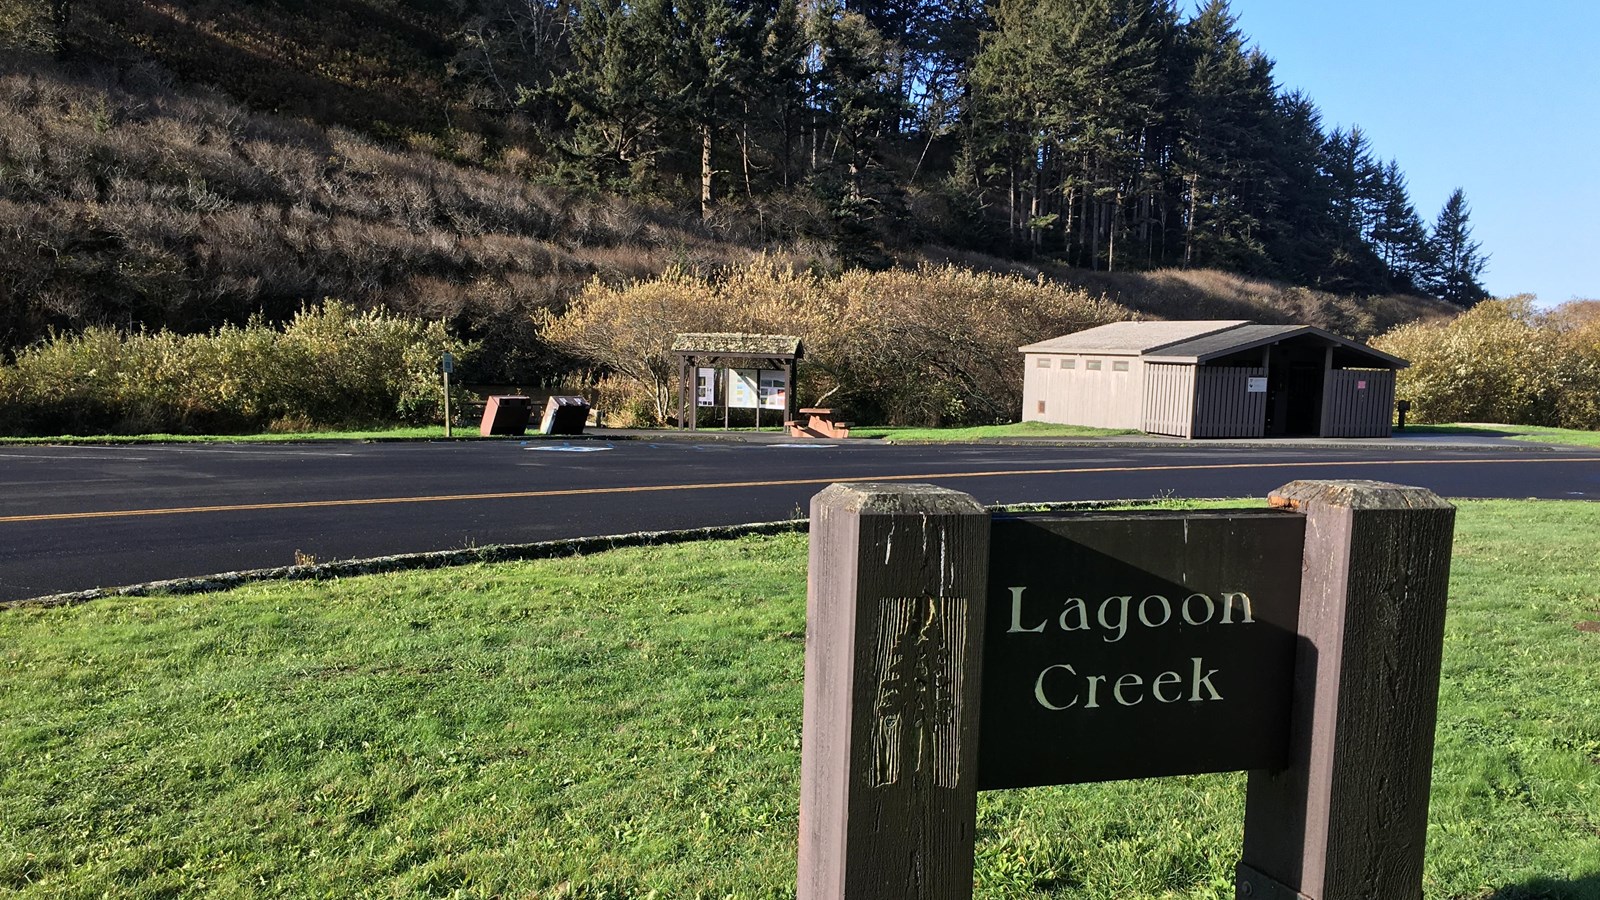 Lagoon Creek sign and parking area.